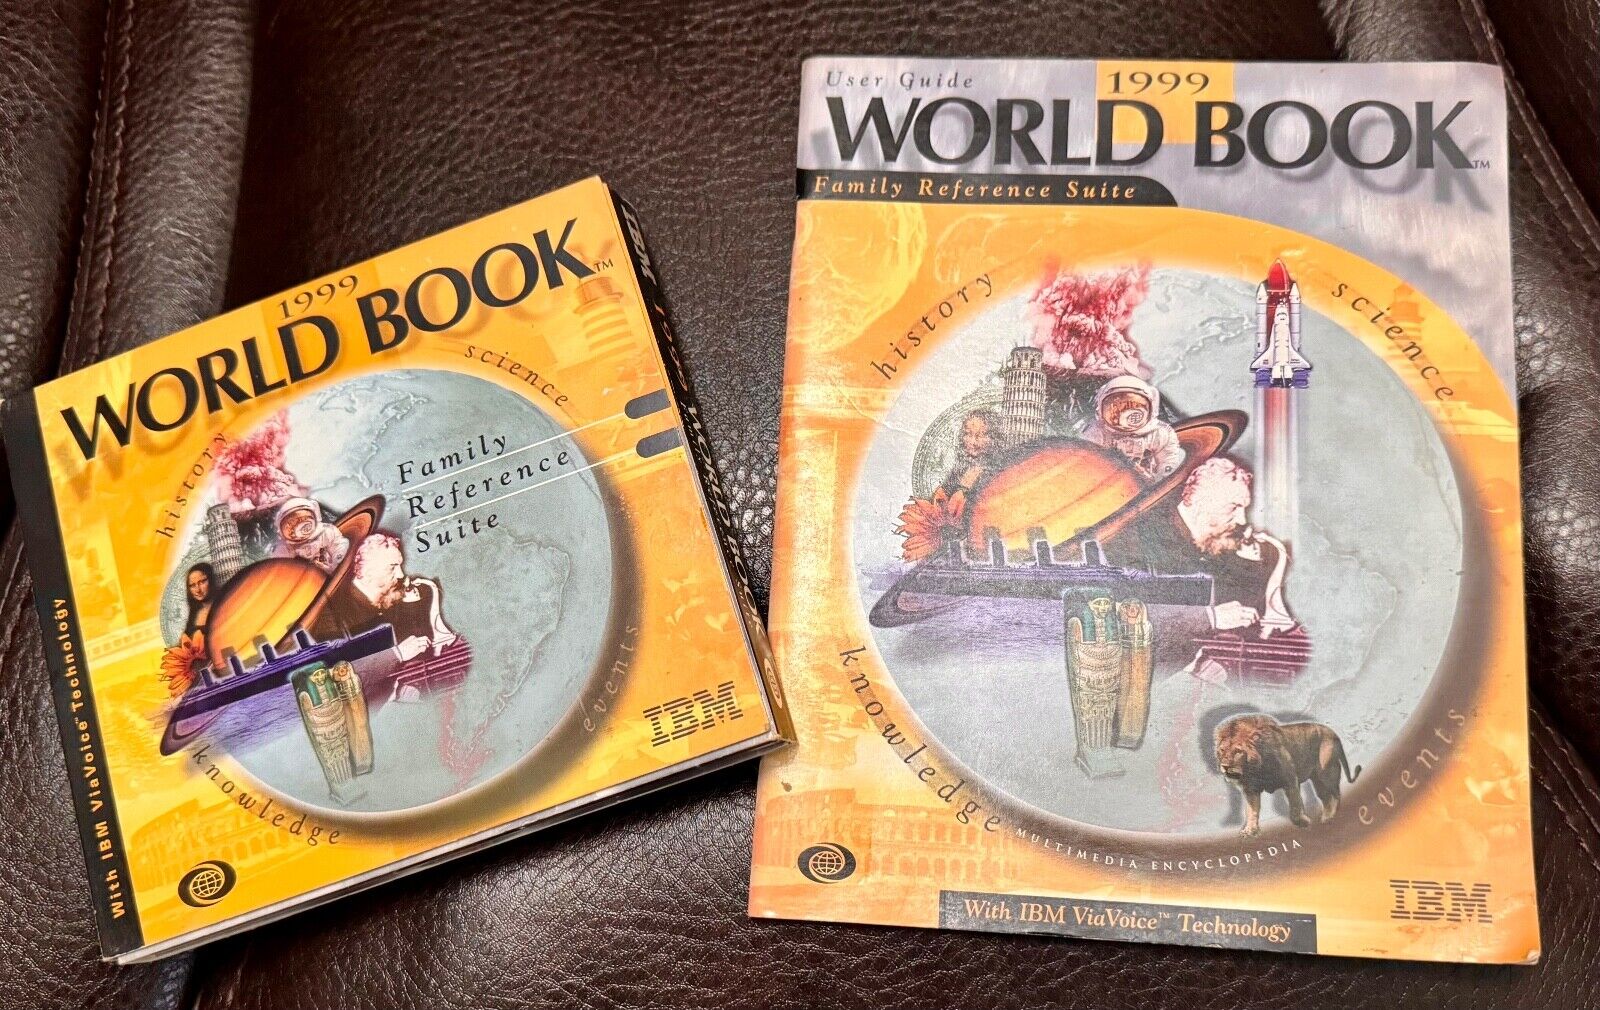 World Book 1999 Family Reference Suite 3 discs